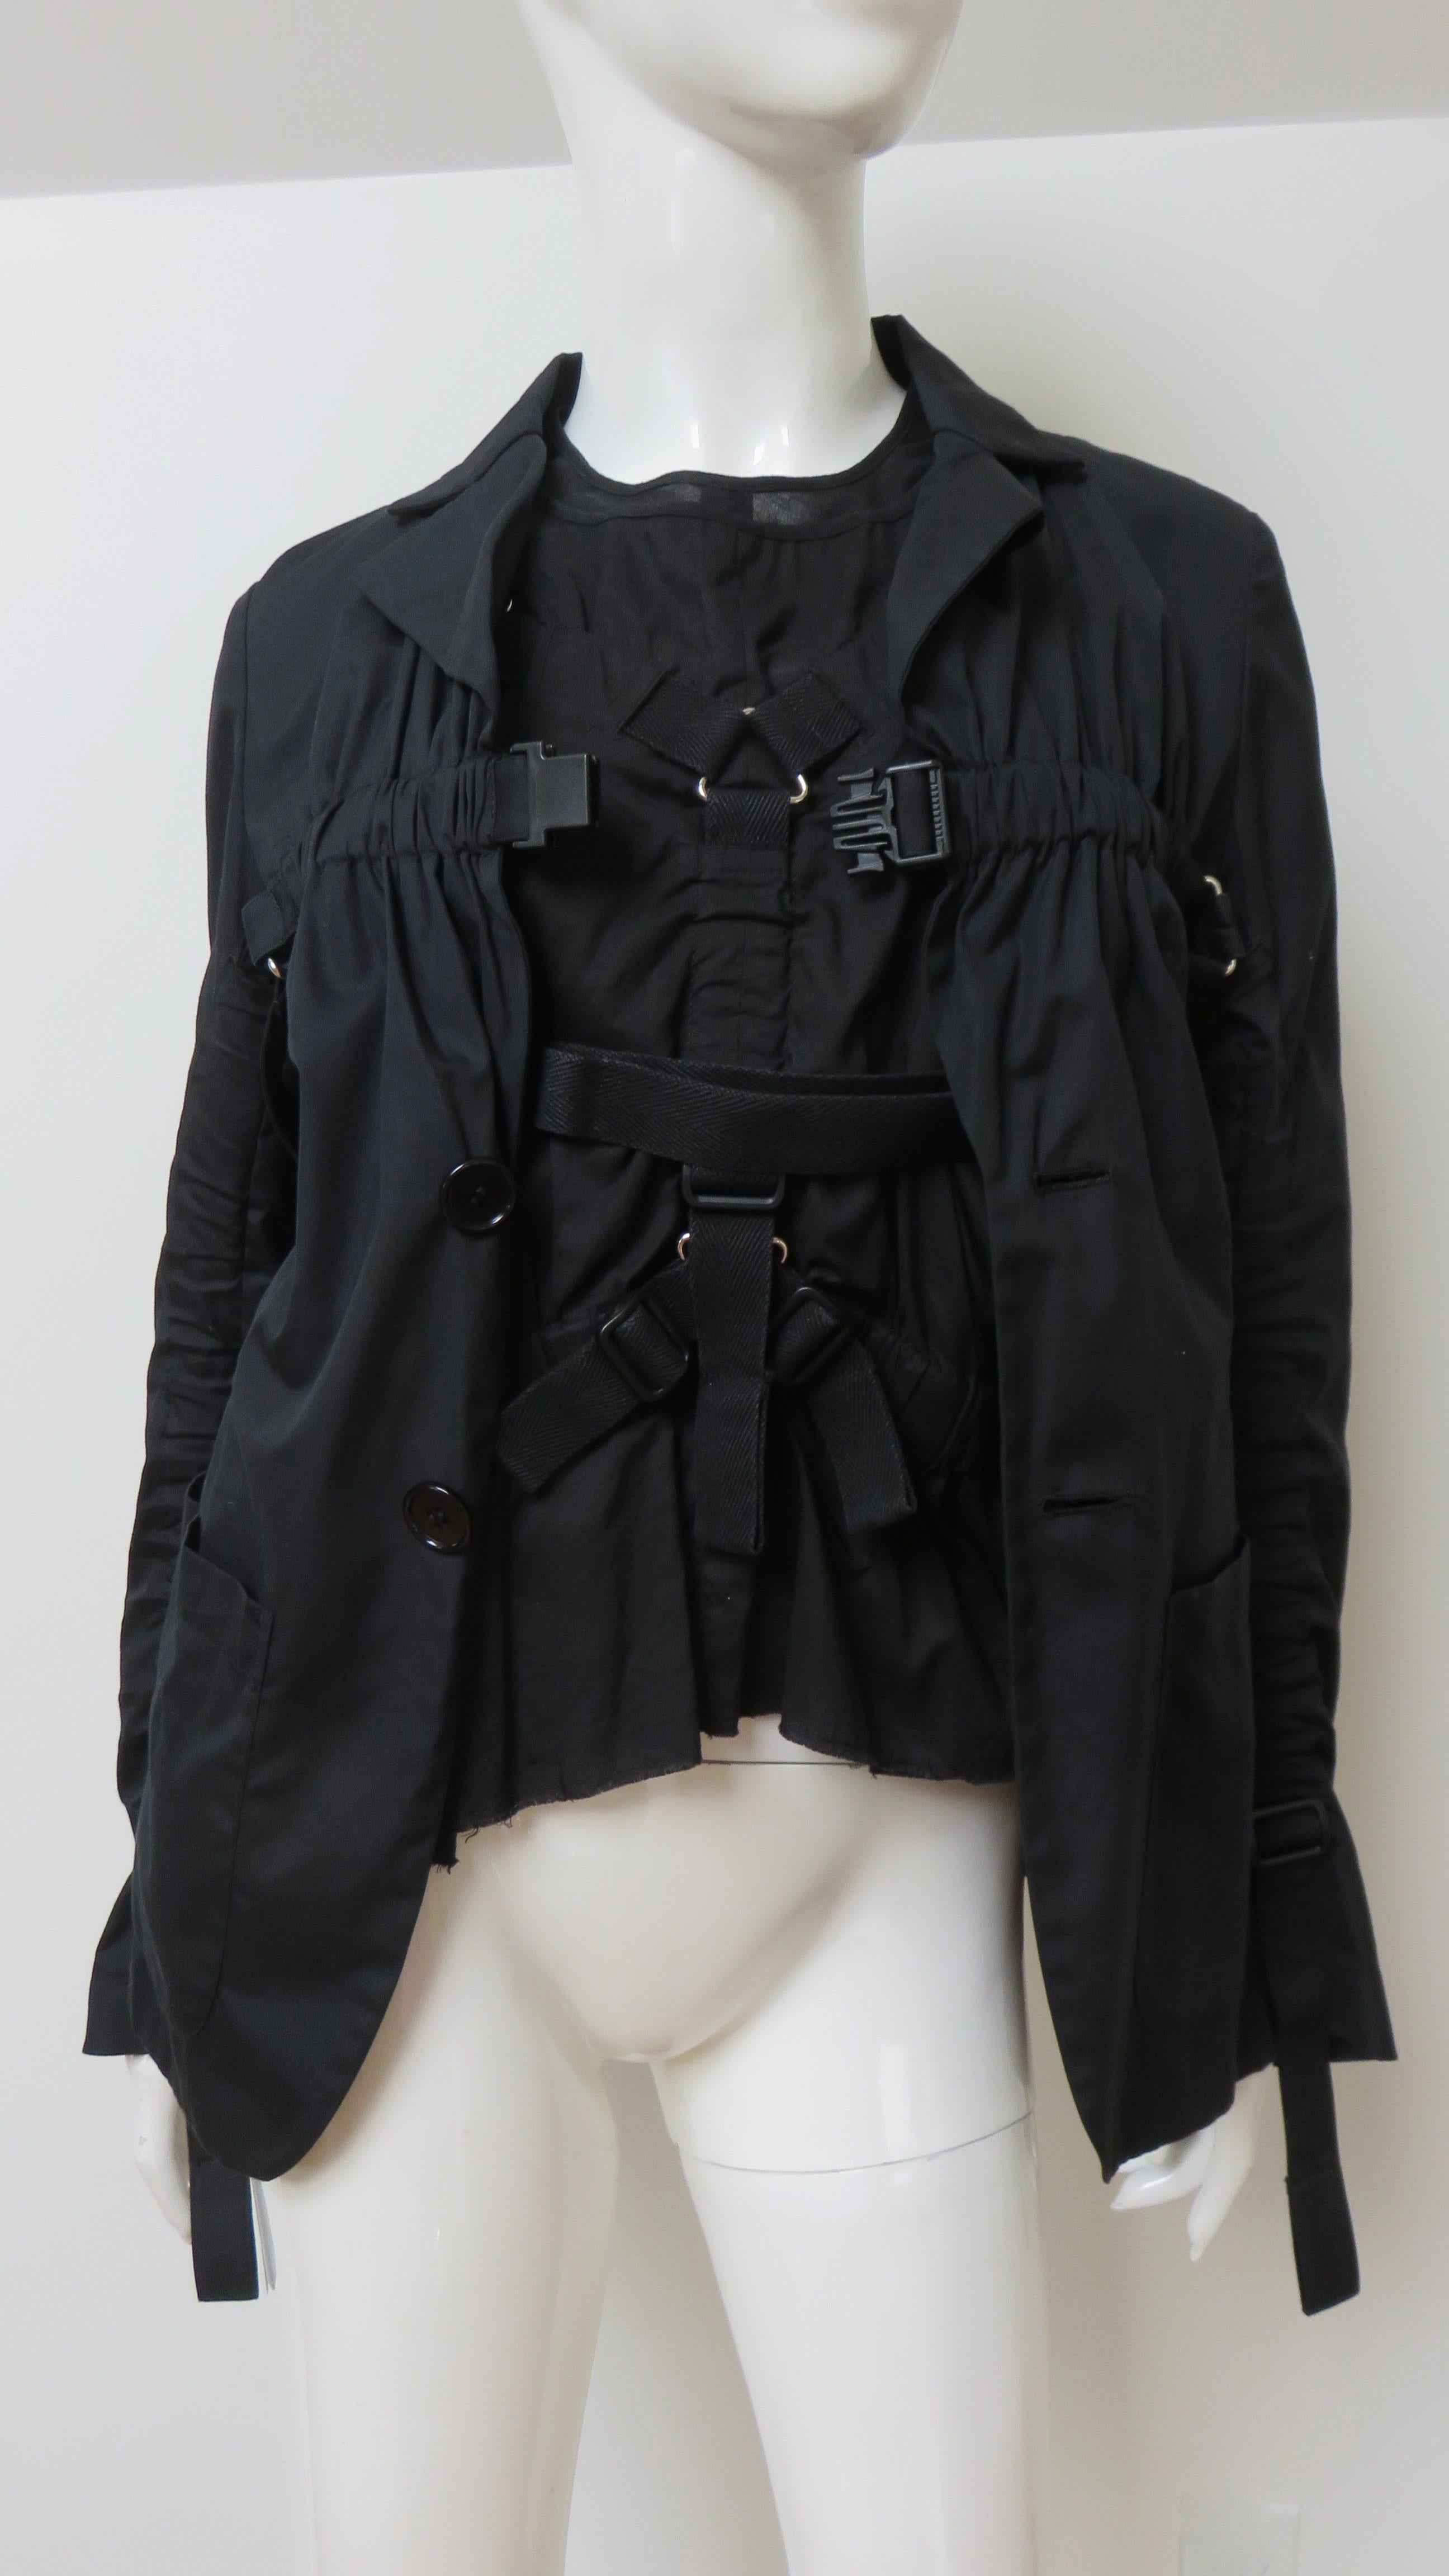 A fabulous black fine cotton 2 piece set consisting of a sleeveless top and matching jacket from Junya Watanabe for Comme des Garcons. The sleeves top has a crew neckline and a configuration of adjustable/moveable straps with buckles attached to